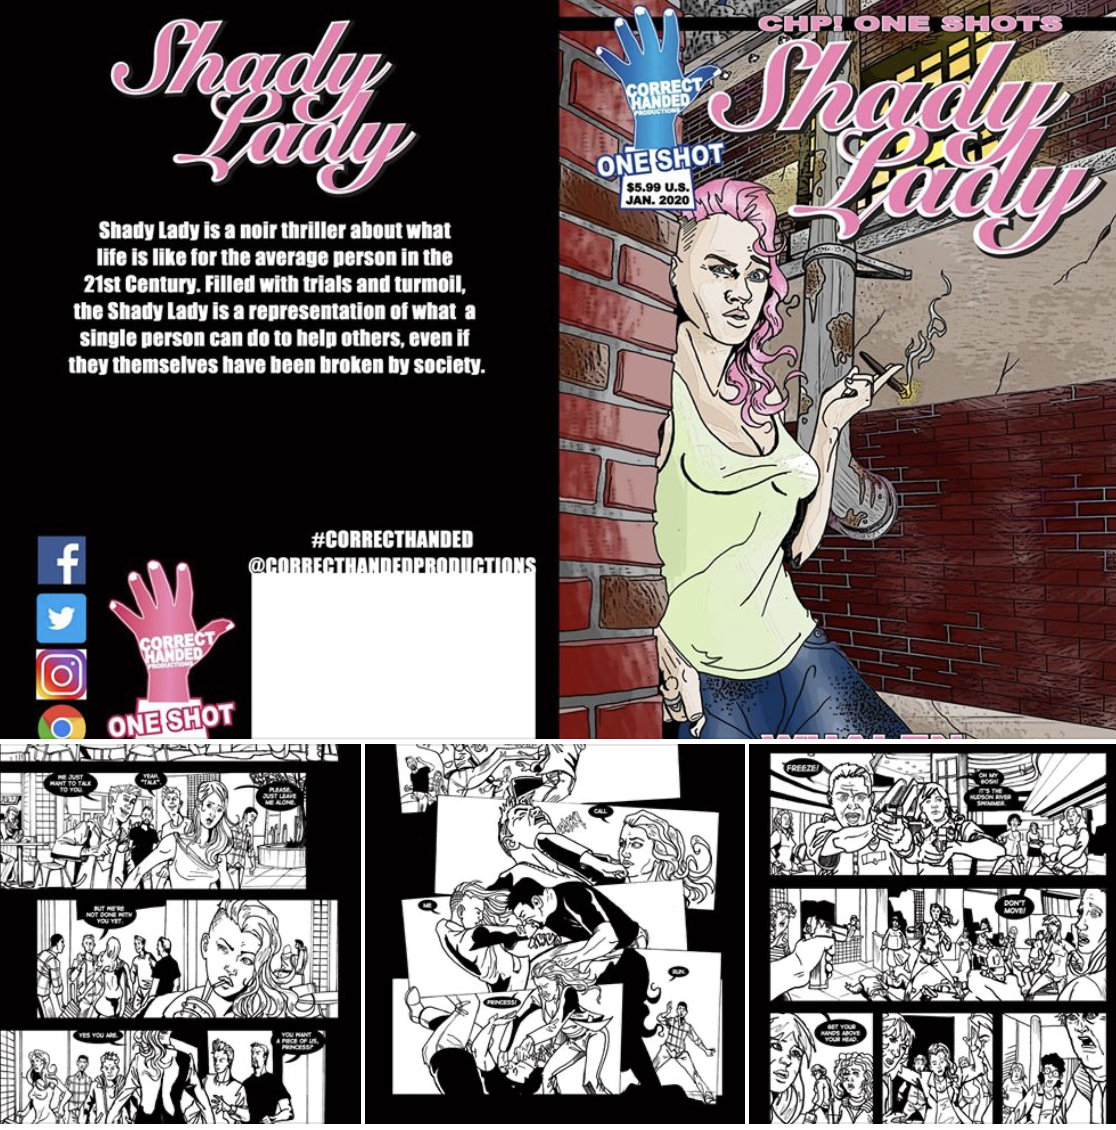 Our first (of many) One-Shots called SHADY LADY comes out next week.